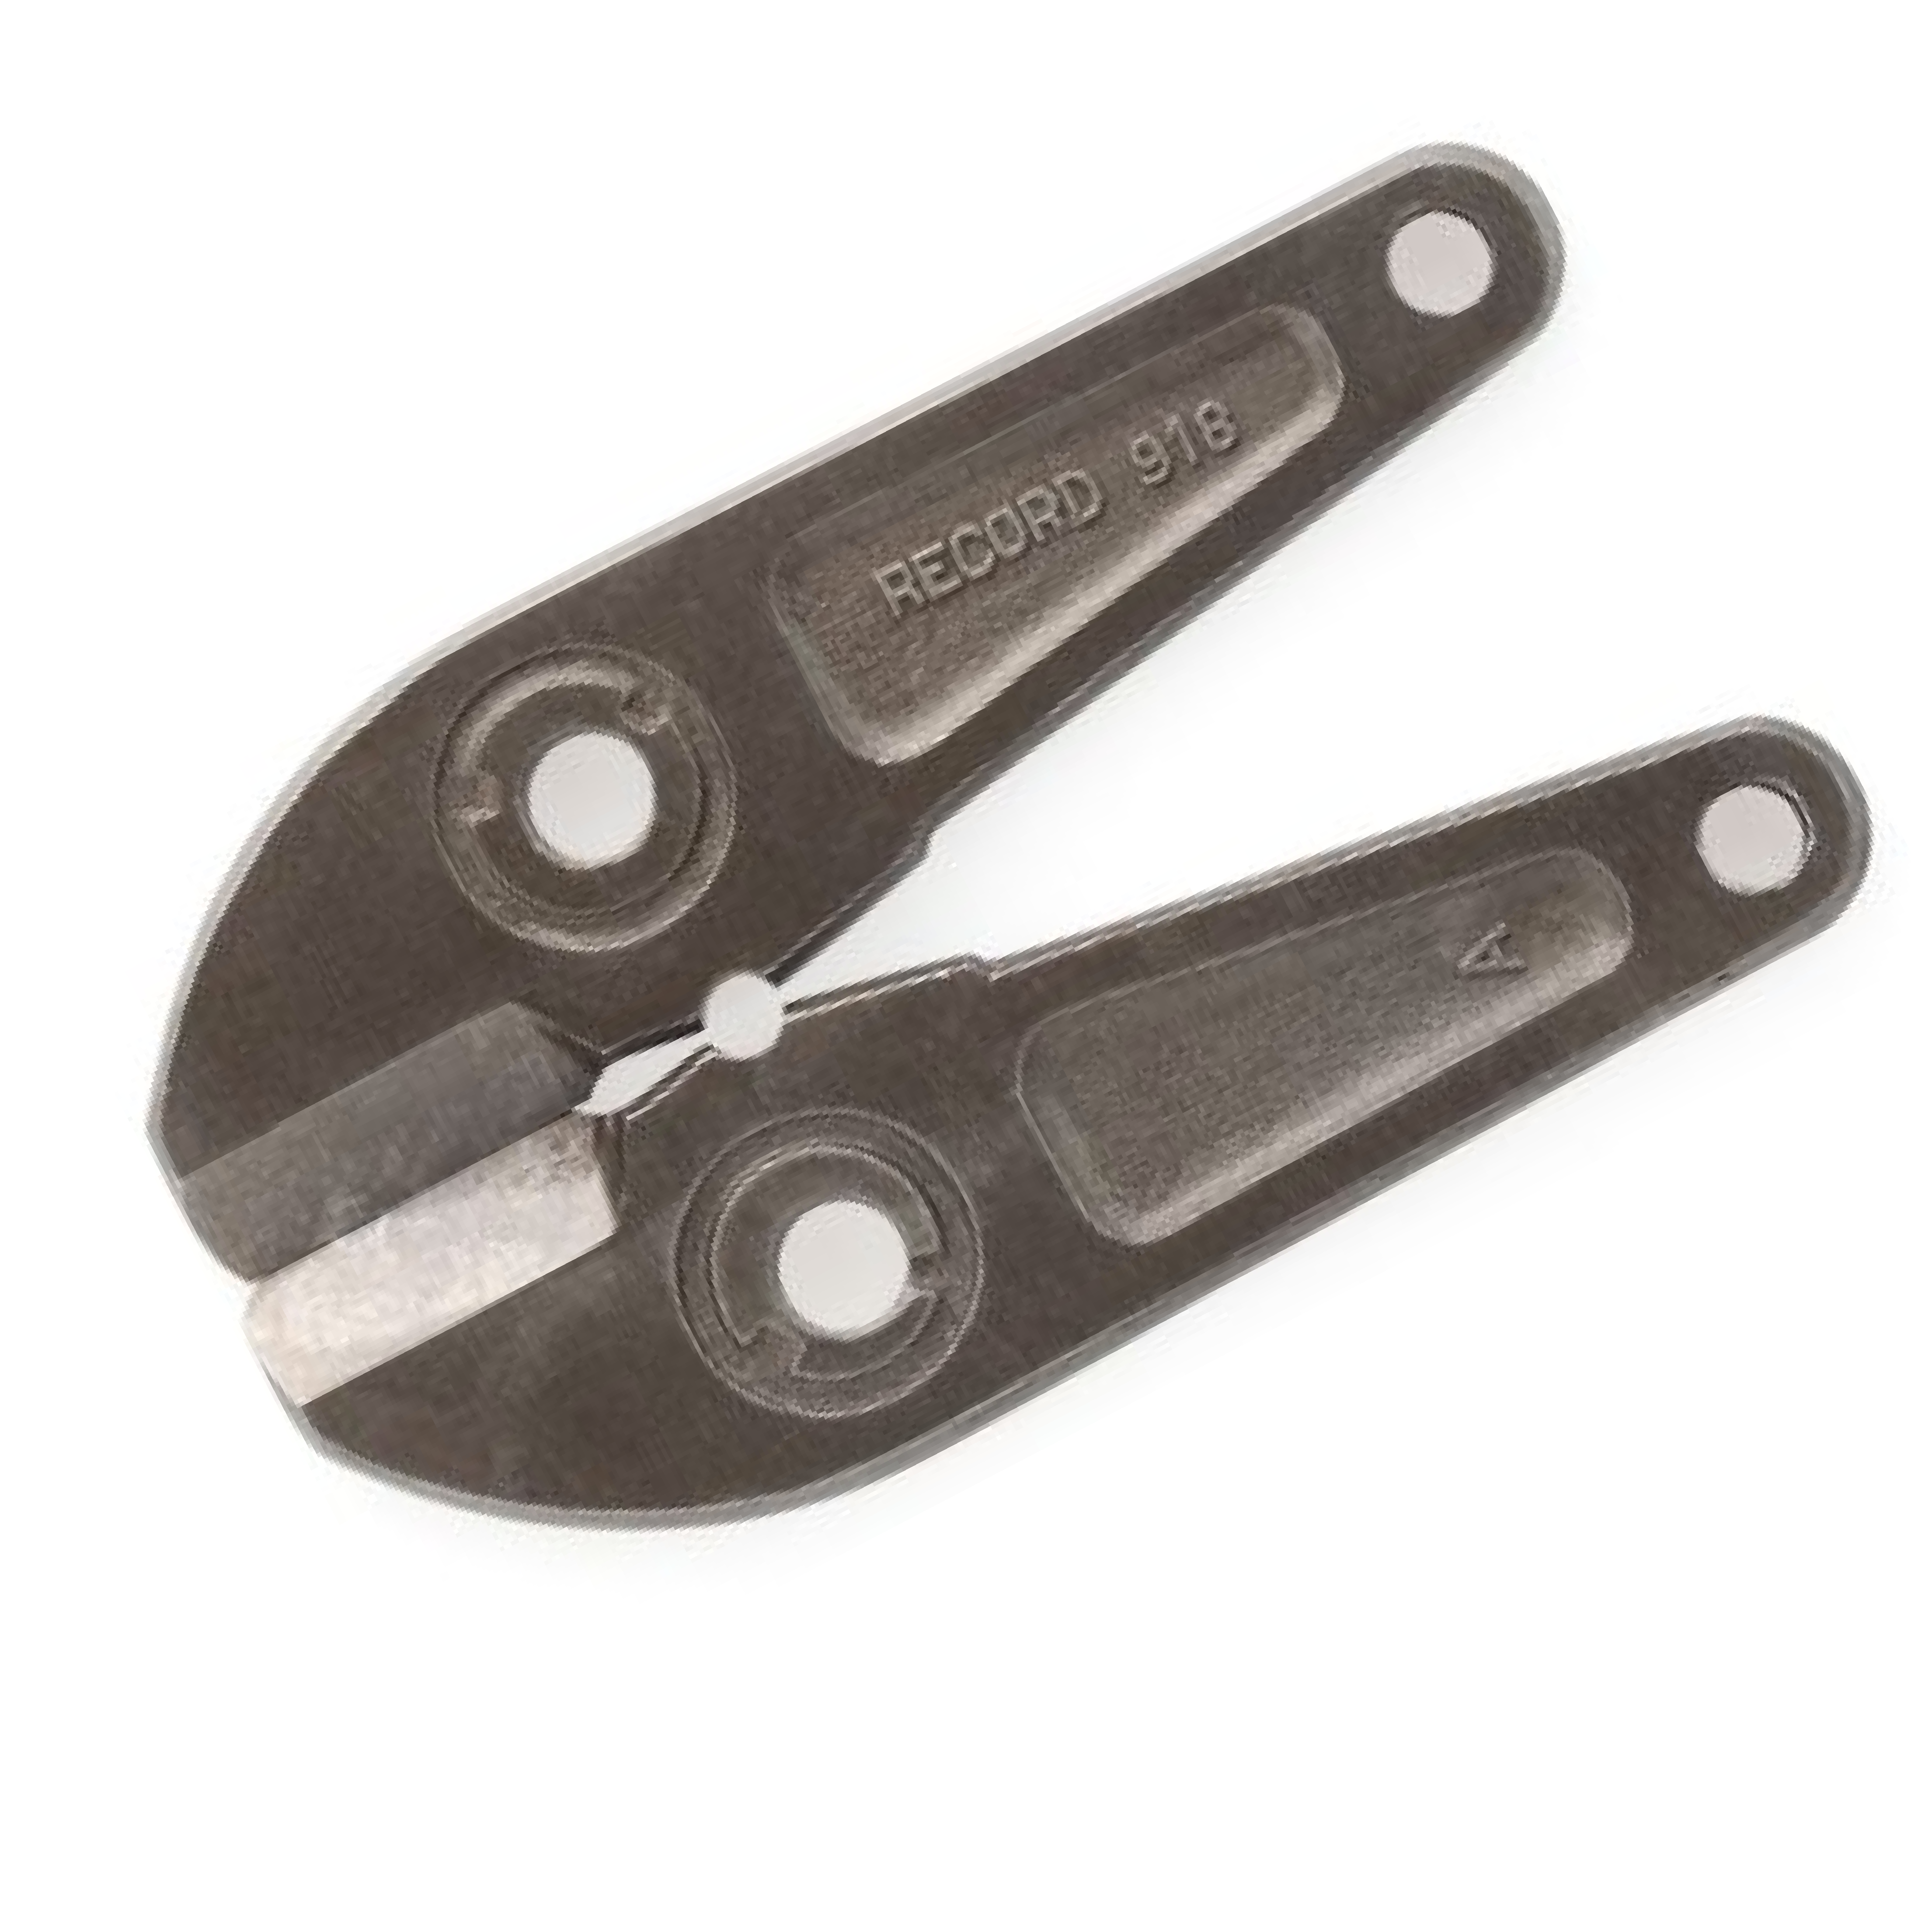 IRWIN TJ924H - Pair of High Tensile Replacement Jaws for 924 Bolt Cutter